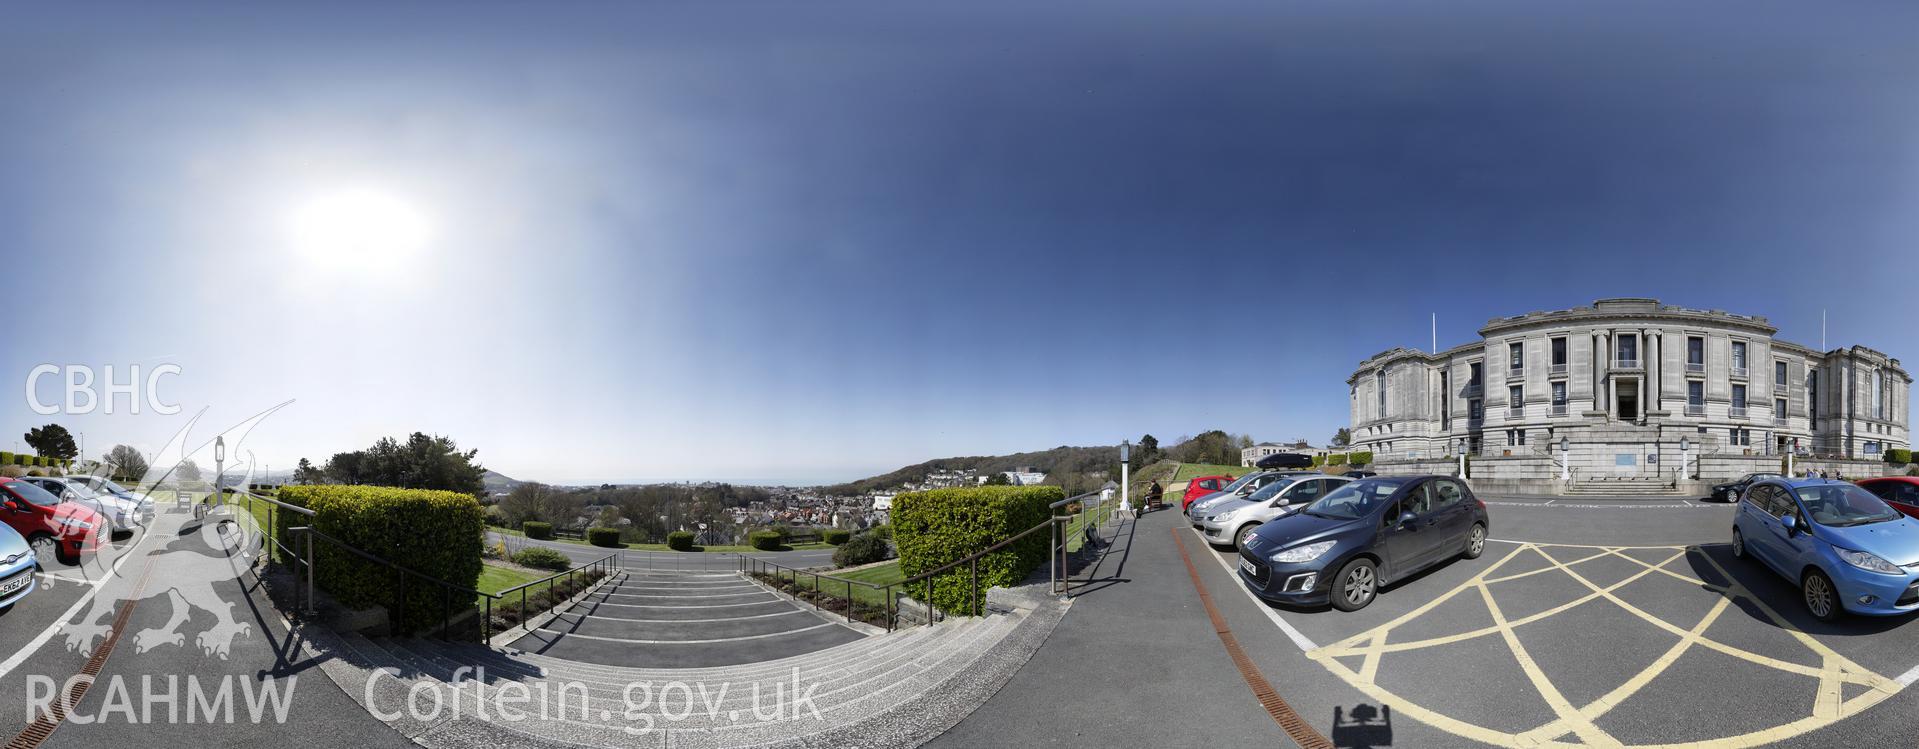 Reduced resolution tiff of stitched images from in front of the National Library of Wales, Aberystwyth produced by Susan Fielding and Rita Singer, 2018. Produced through European Travellers to Wales project.